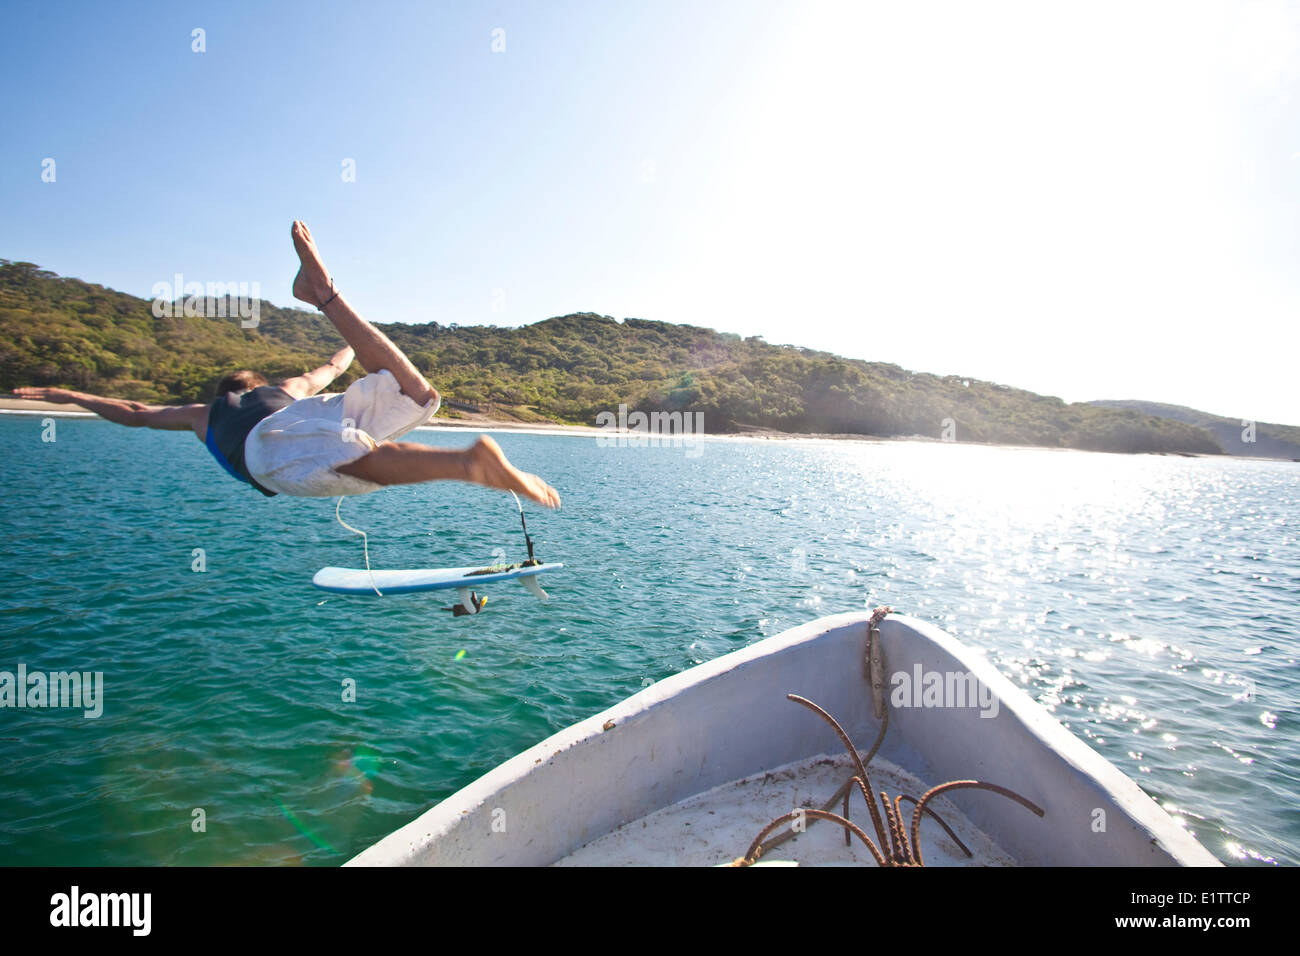 A young man jumps off the water taxi to go surf. San Juan del Sur, Nicaragua Stock Photo